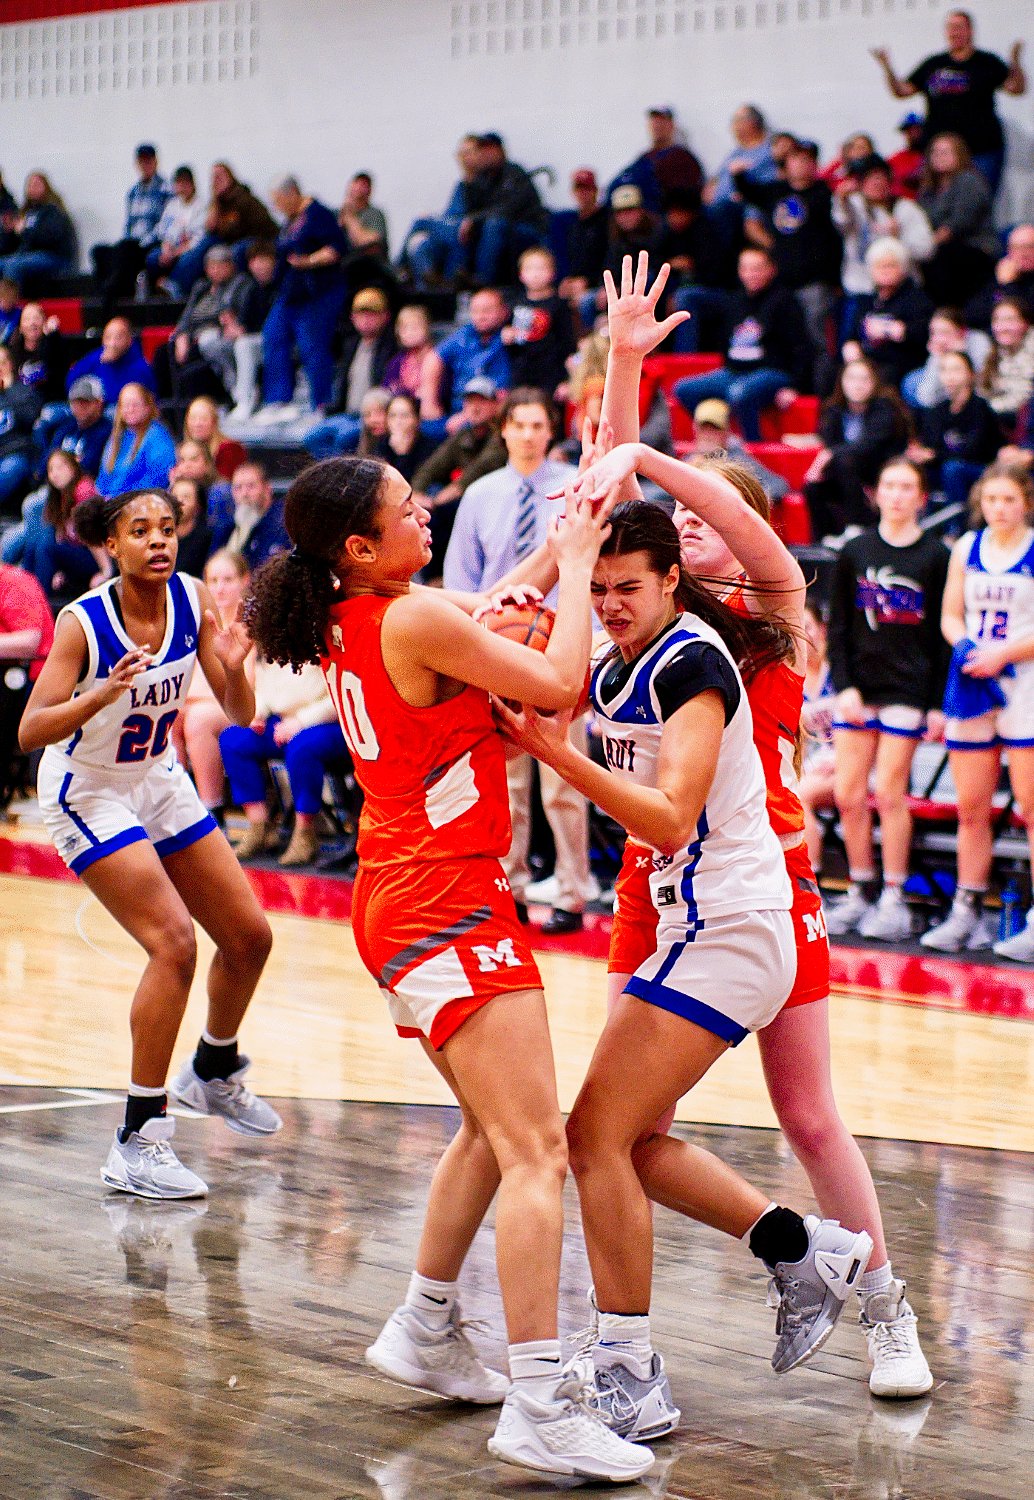 Lady Jacket teammates Jayla Jackson and Macy Fischer swarm Sadie Vander Schaaf to force a Lady Dog turnover. [see more shots, buy basketball photos]